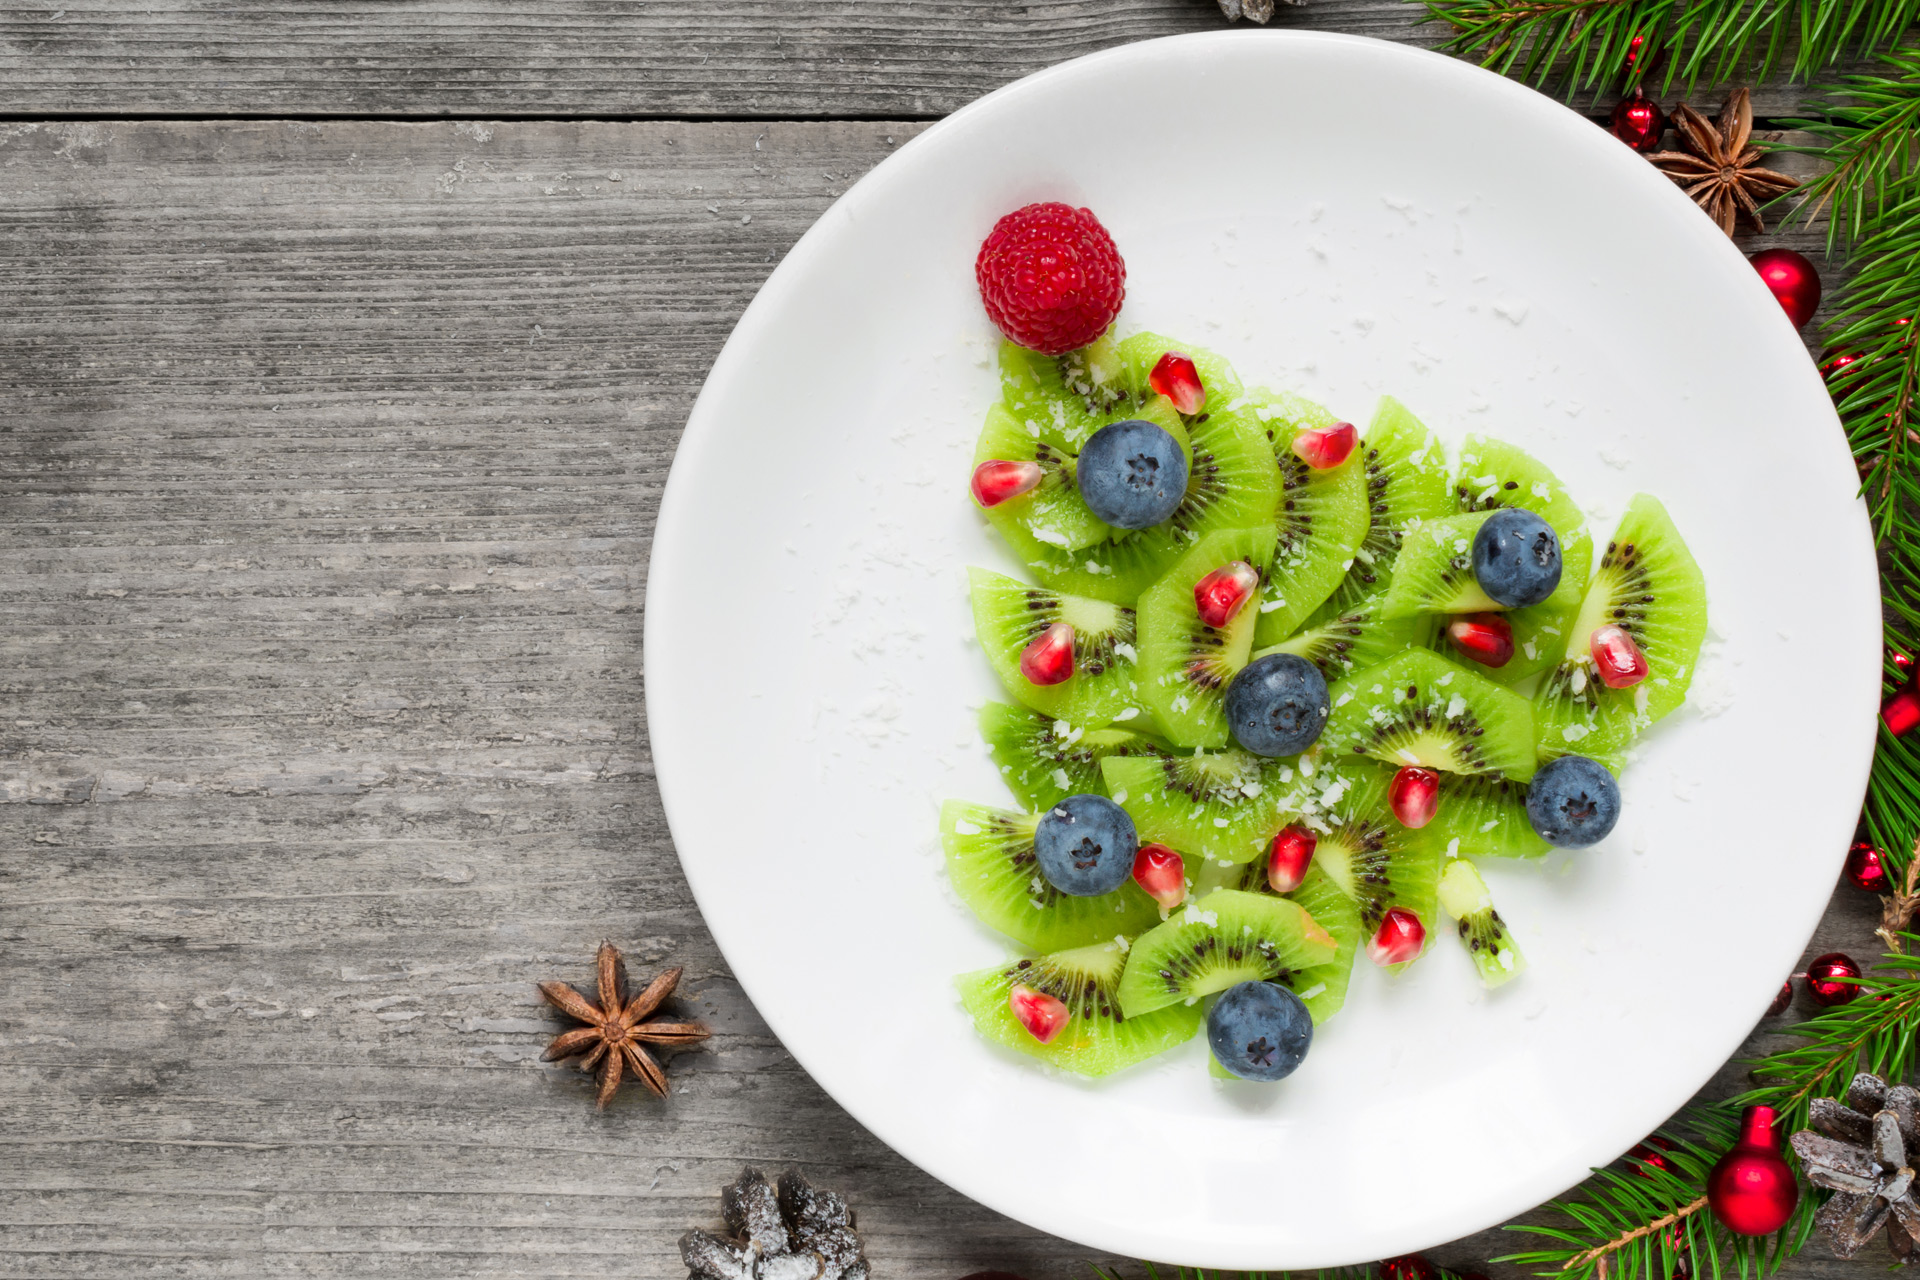 A Nutritionist’s Guide To Having A Healthy Christmas